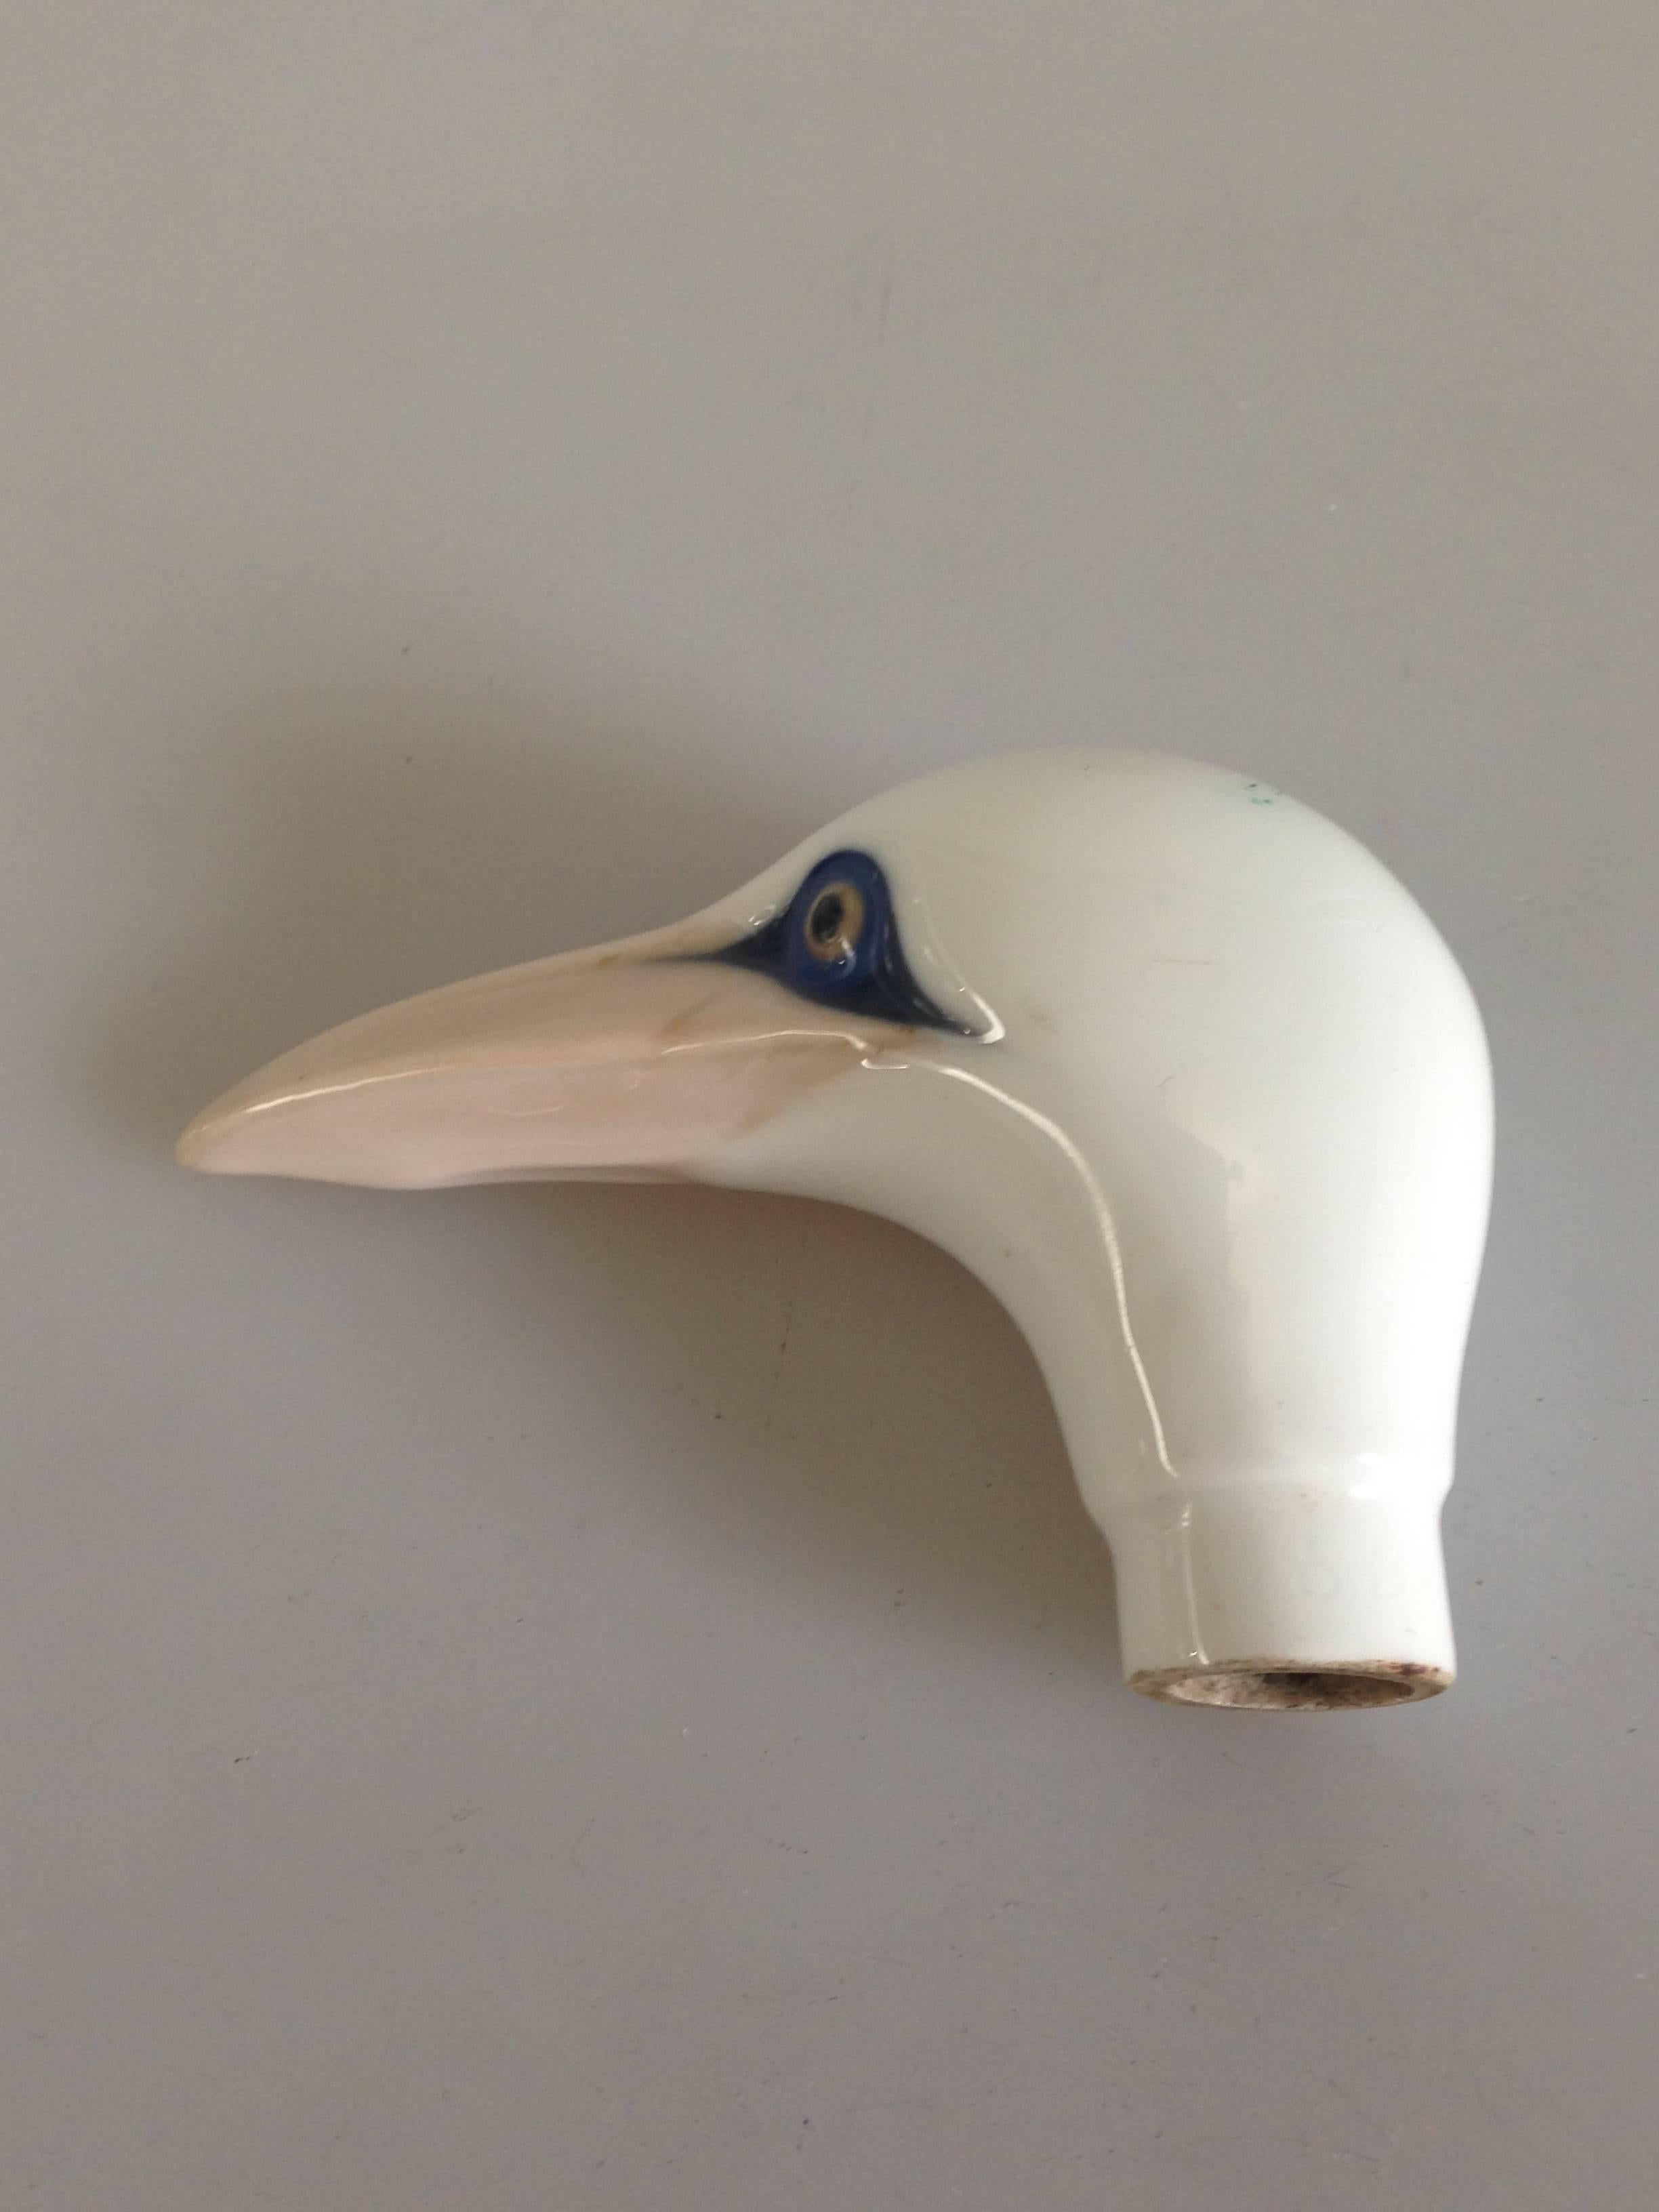 Royal Copenhagen Canehandle as a bird #428. Has a hairline crack, but otherwise perfect.

Royal Copenhagen, officially the Royal Porcelain Factory (Danish: Den Kongelige Porcelænsfabrik), is a manufacturer of porcelain products and was founded in